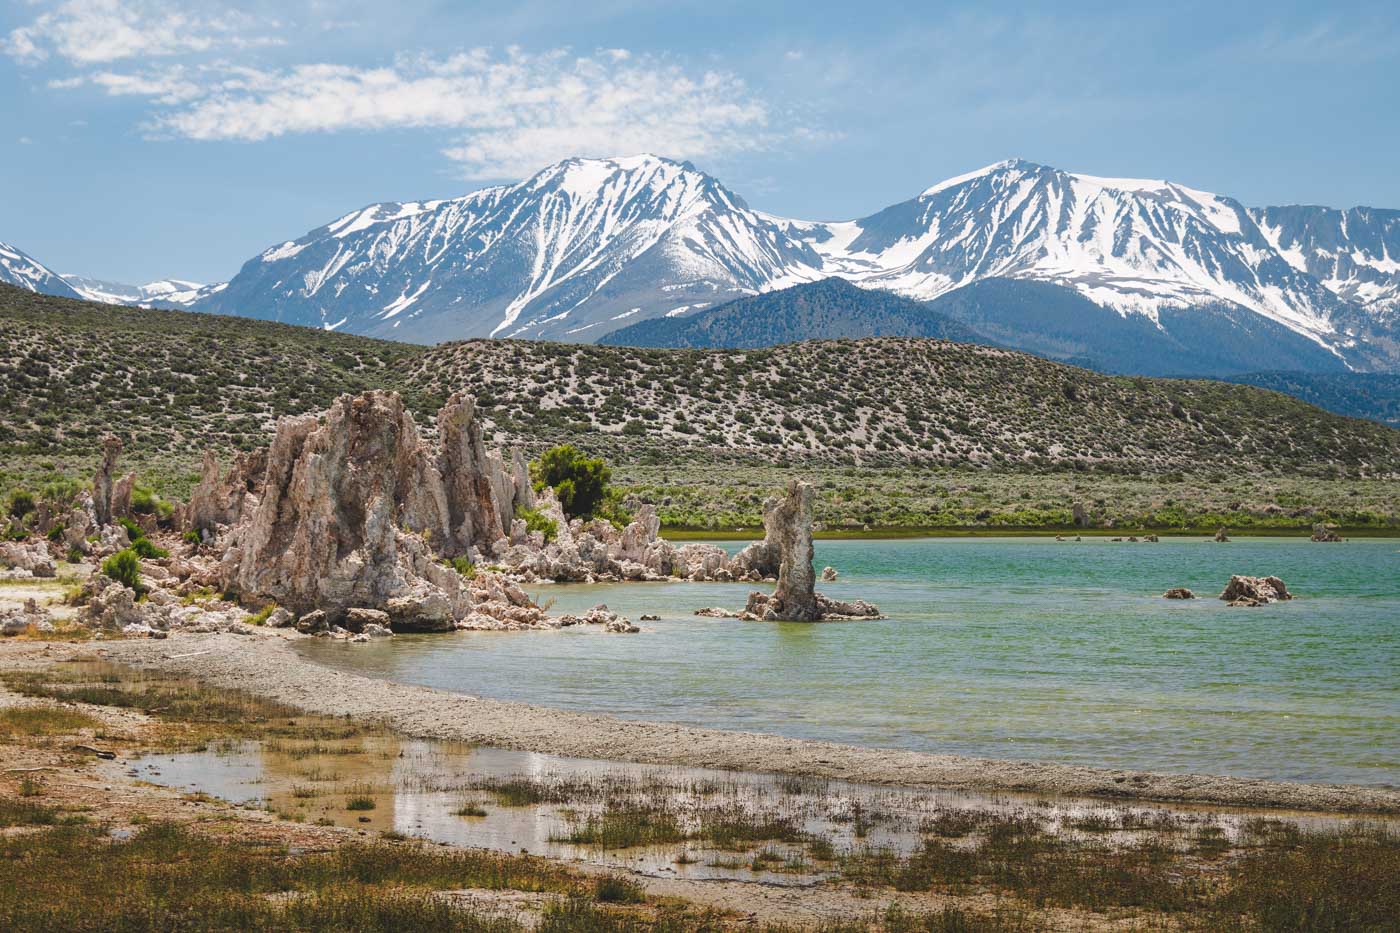 Petrified towers of salt on the shores of Mono Lake with a backdrop of snow covered mountains.